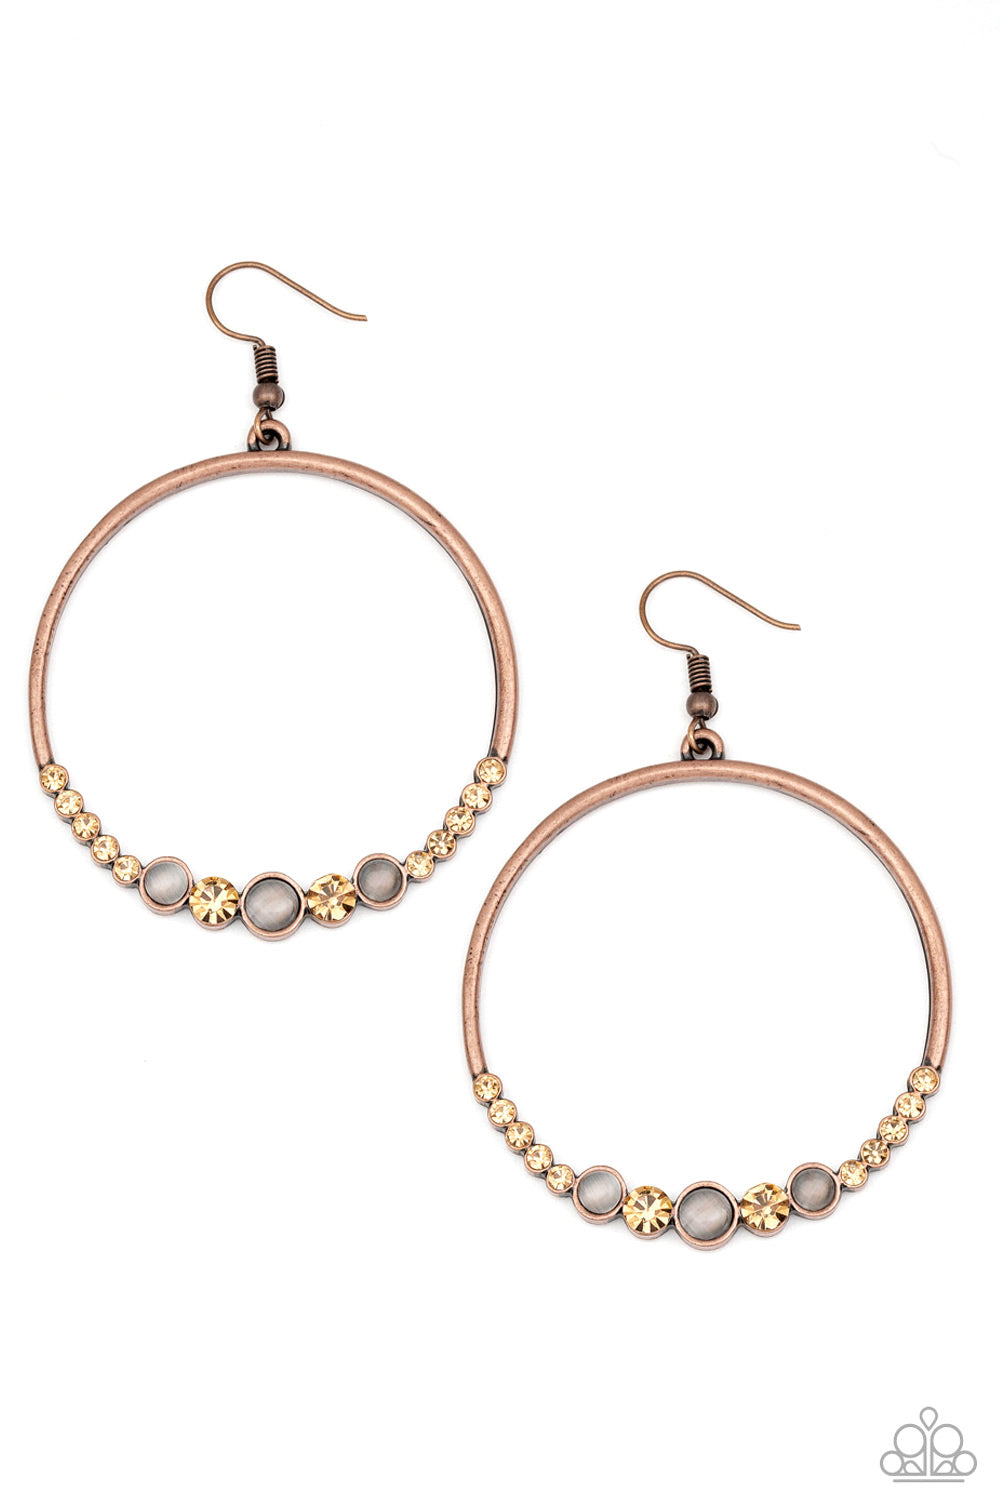 five-dollar-jewelry-dancing-radiance-copper-earrings-paparazzi-accessories